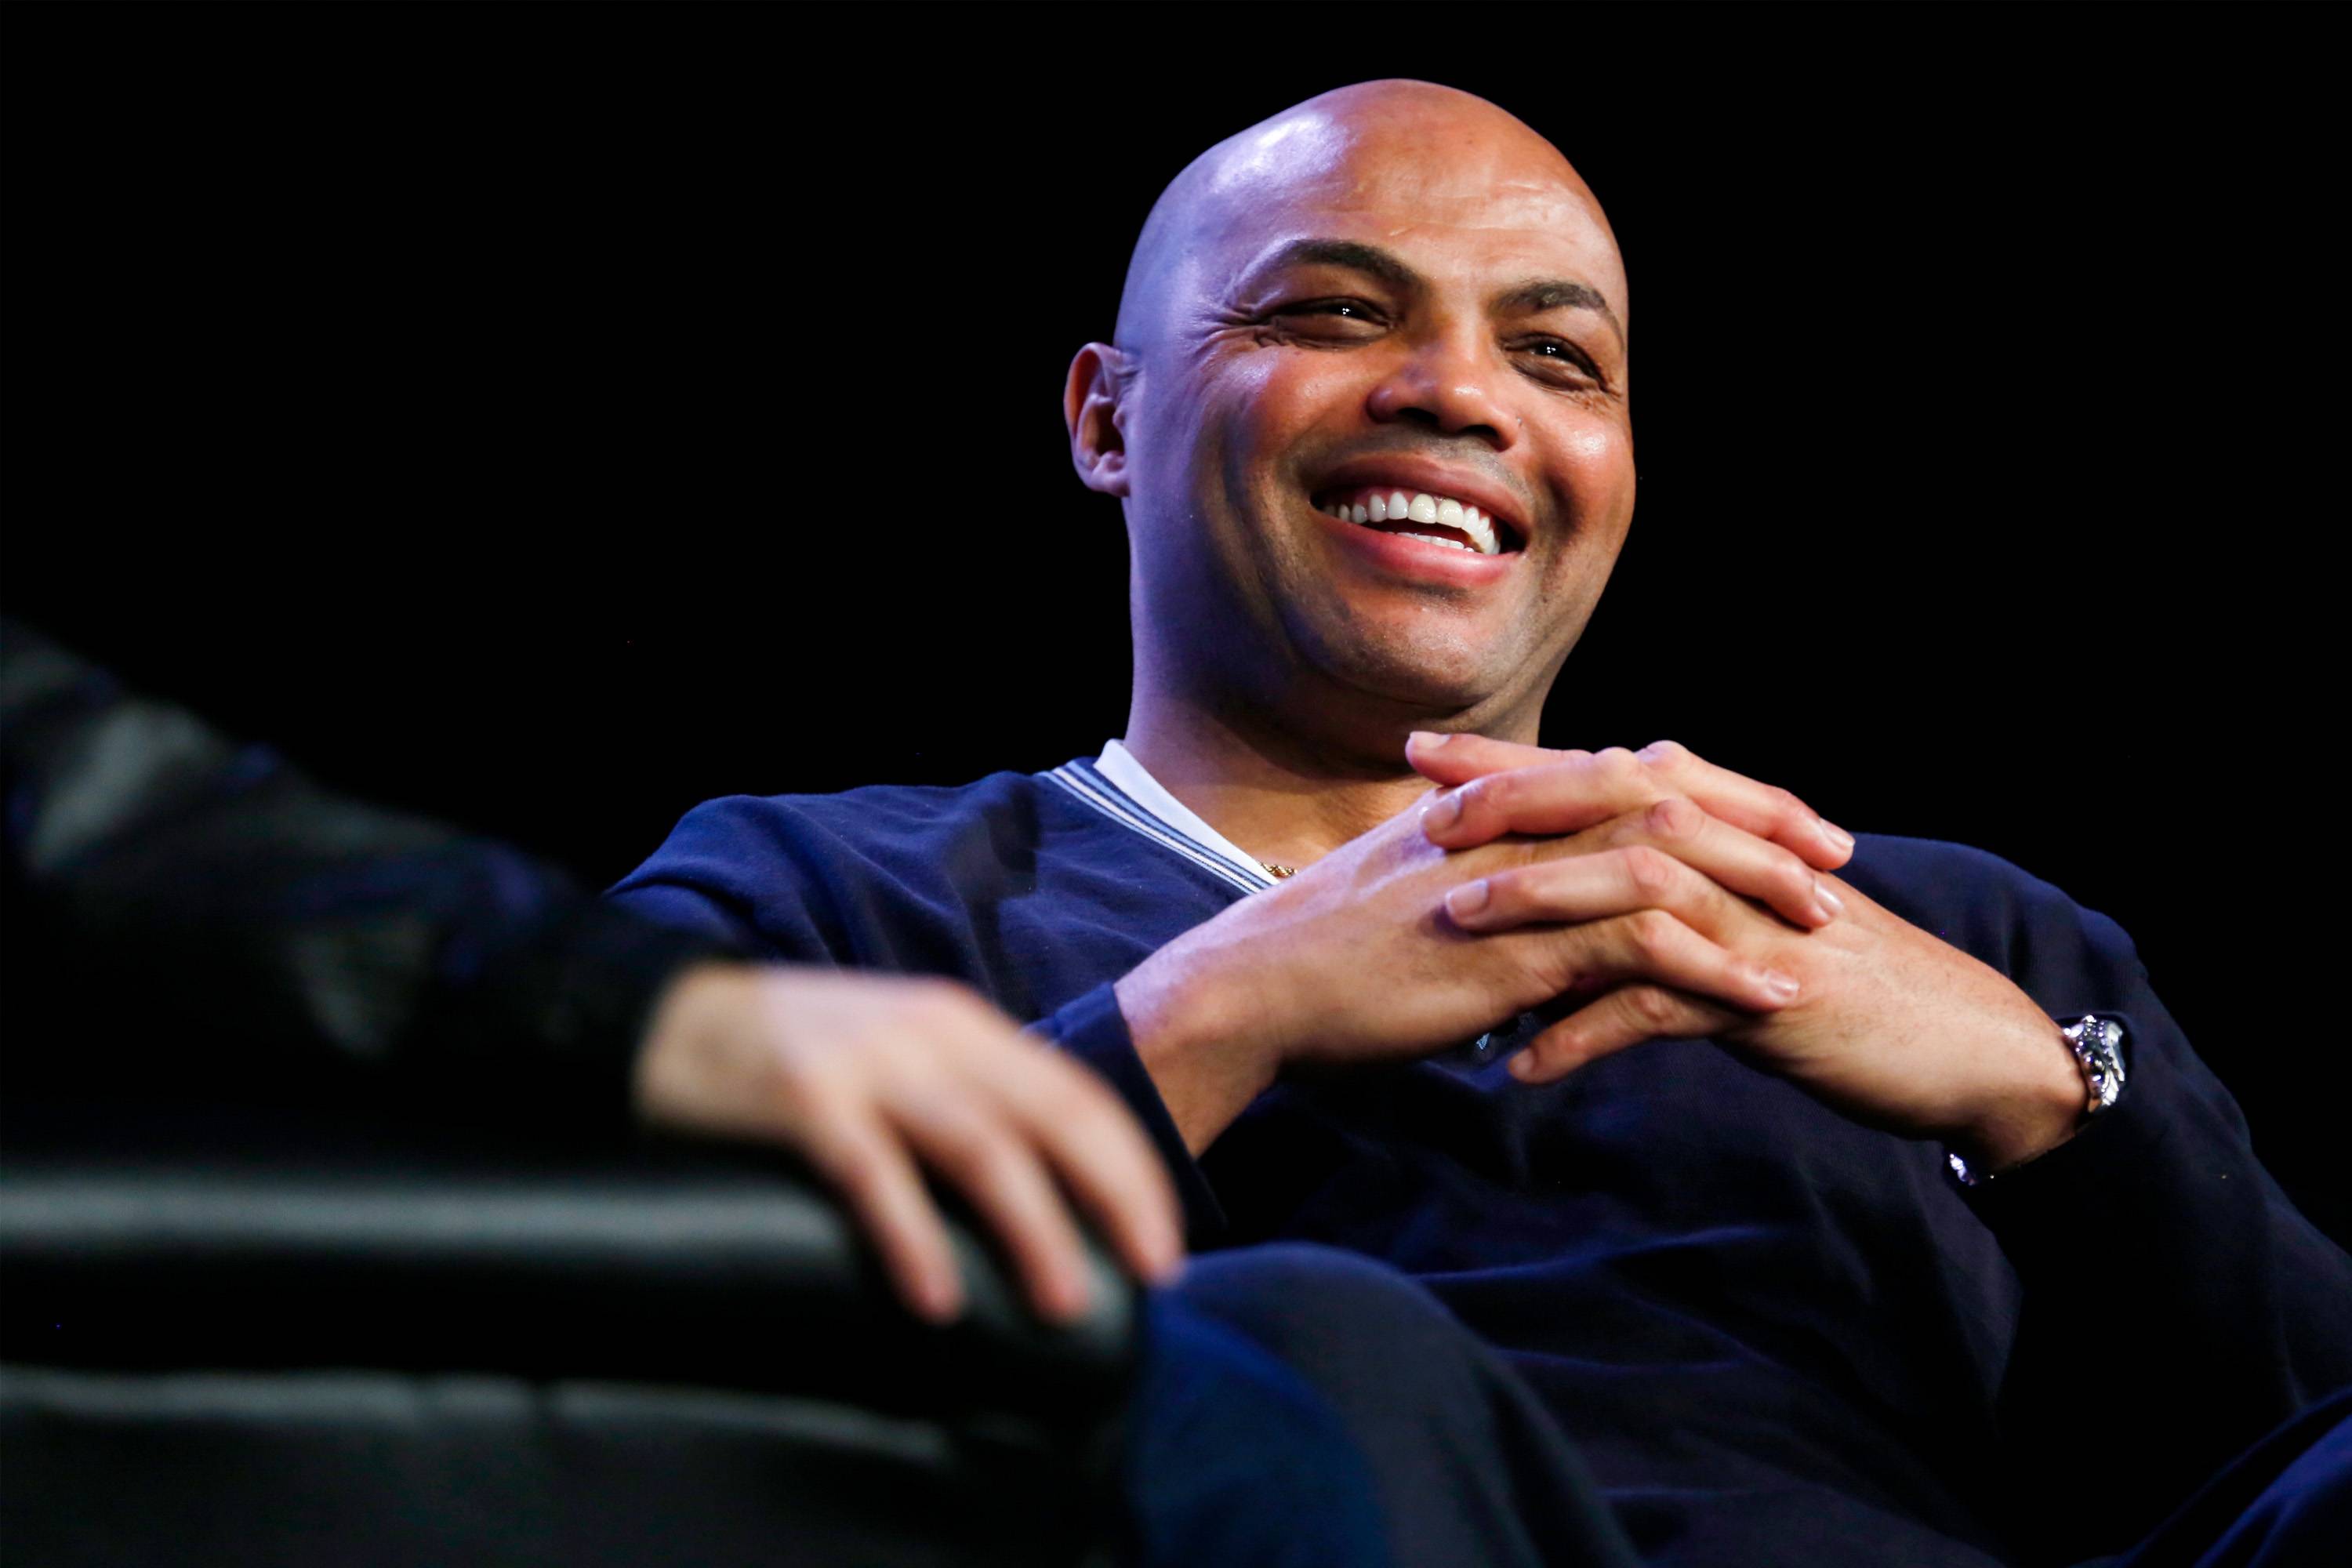 AUSTIN, TX - MARCH 13: Former professional basketball player Charles Barkley speaks onstage at 'How to Remain Relevant In Today's Digital Age' during the 2015 SXSW Music, Film + Interactive Festival at Austin Convention Center on March 13, 2015 in Austin, Texas. (Photo by Gerry Hanan/Getty Images for SXSW)